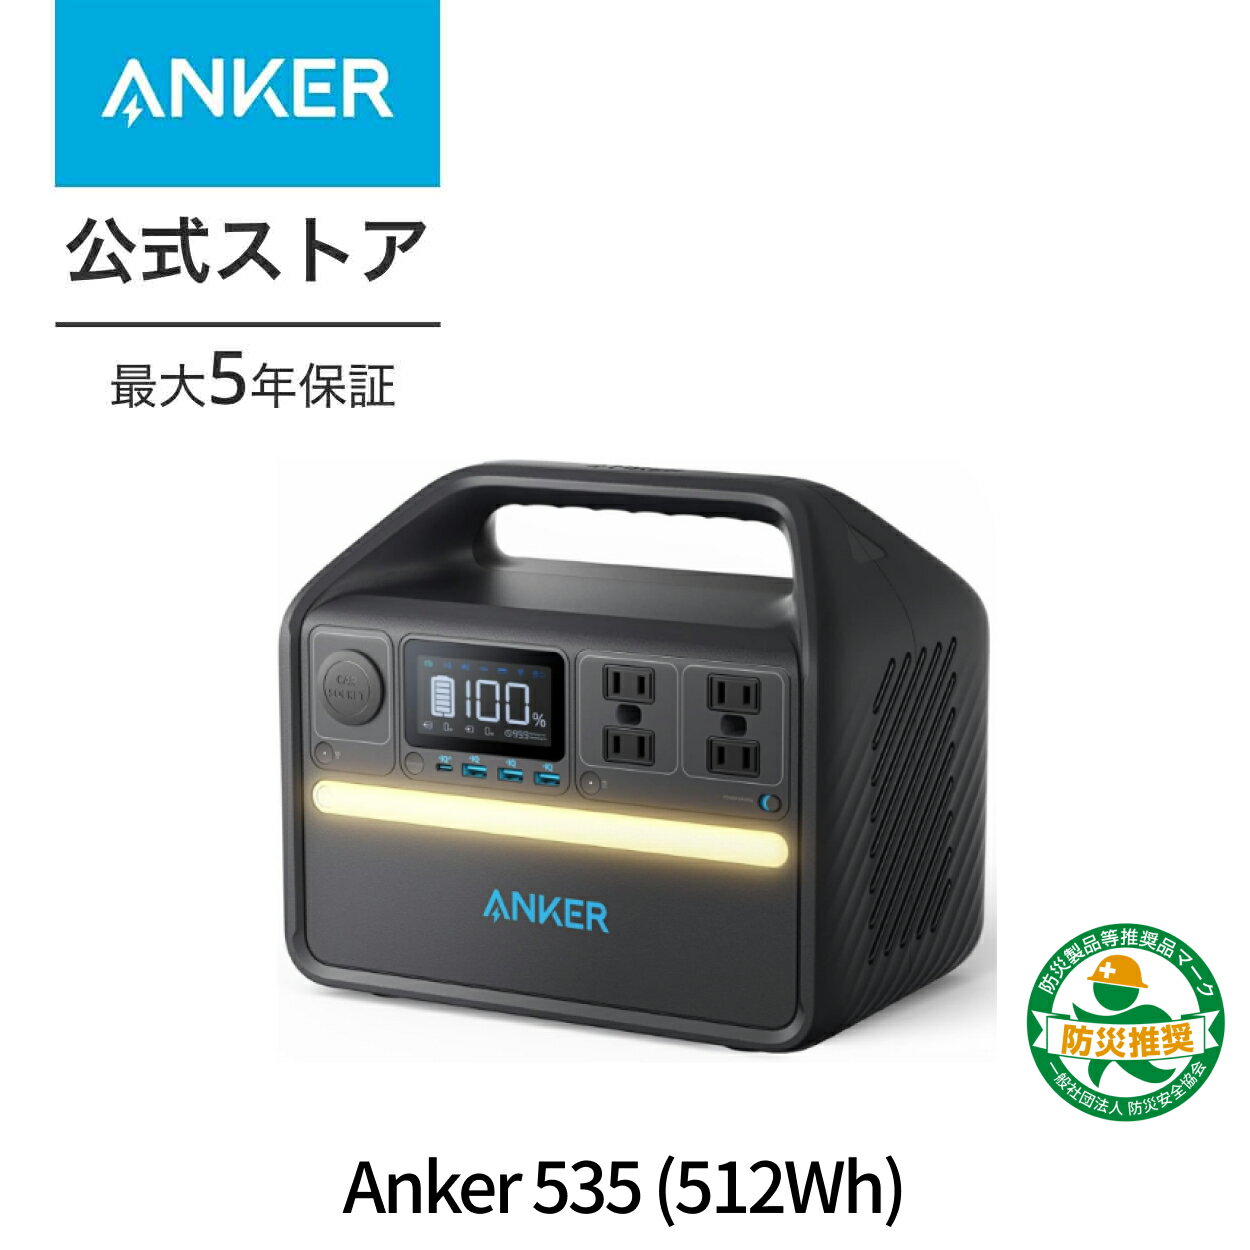 Anker 535 ポータブル電源 512Wh 定格500W